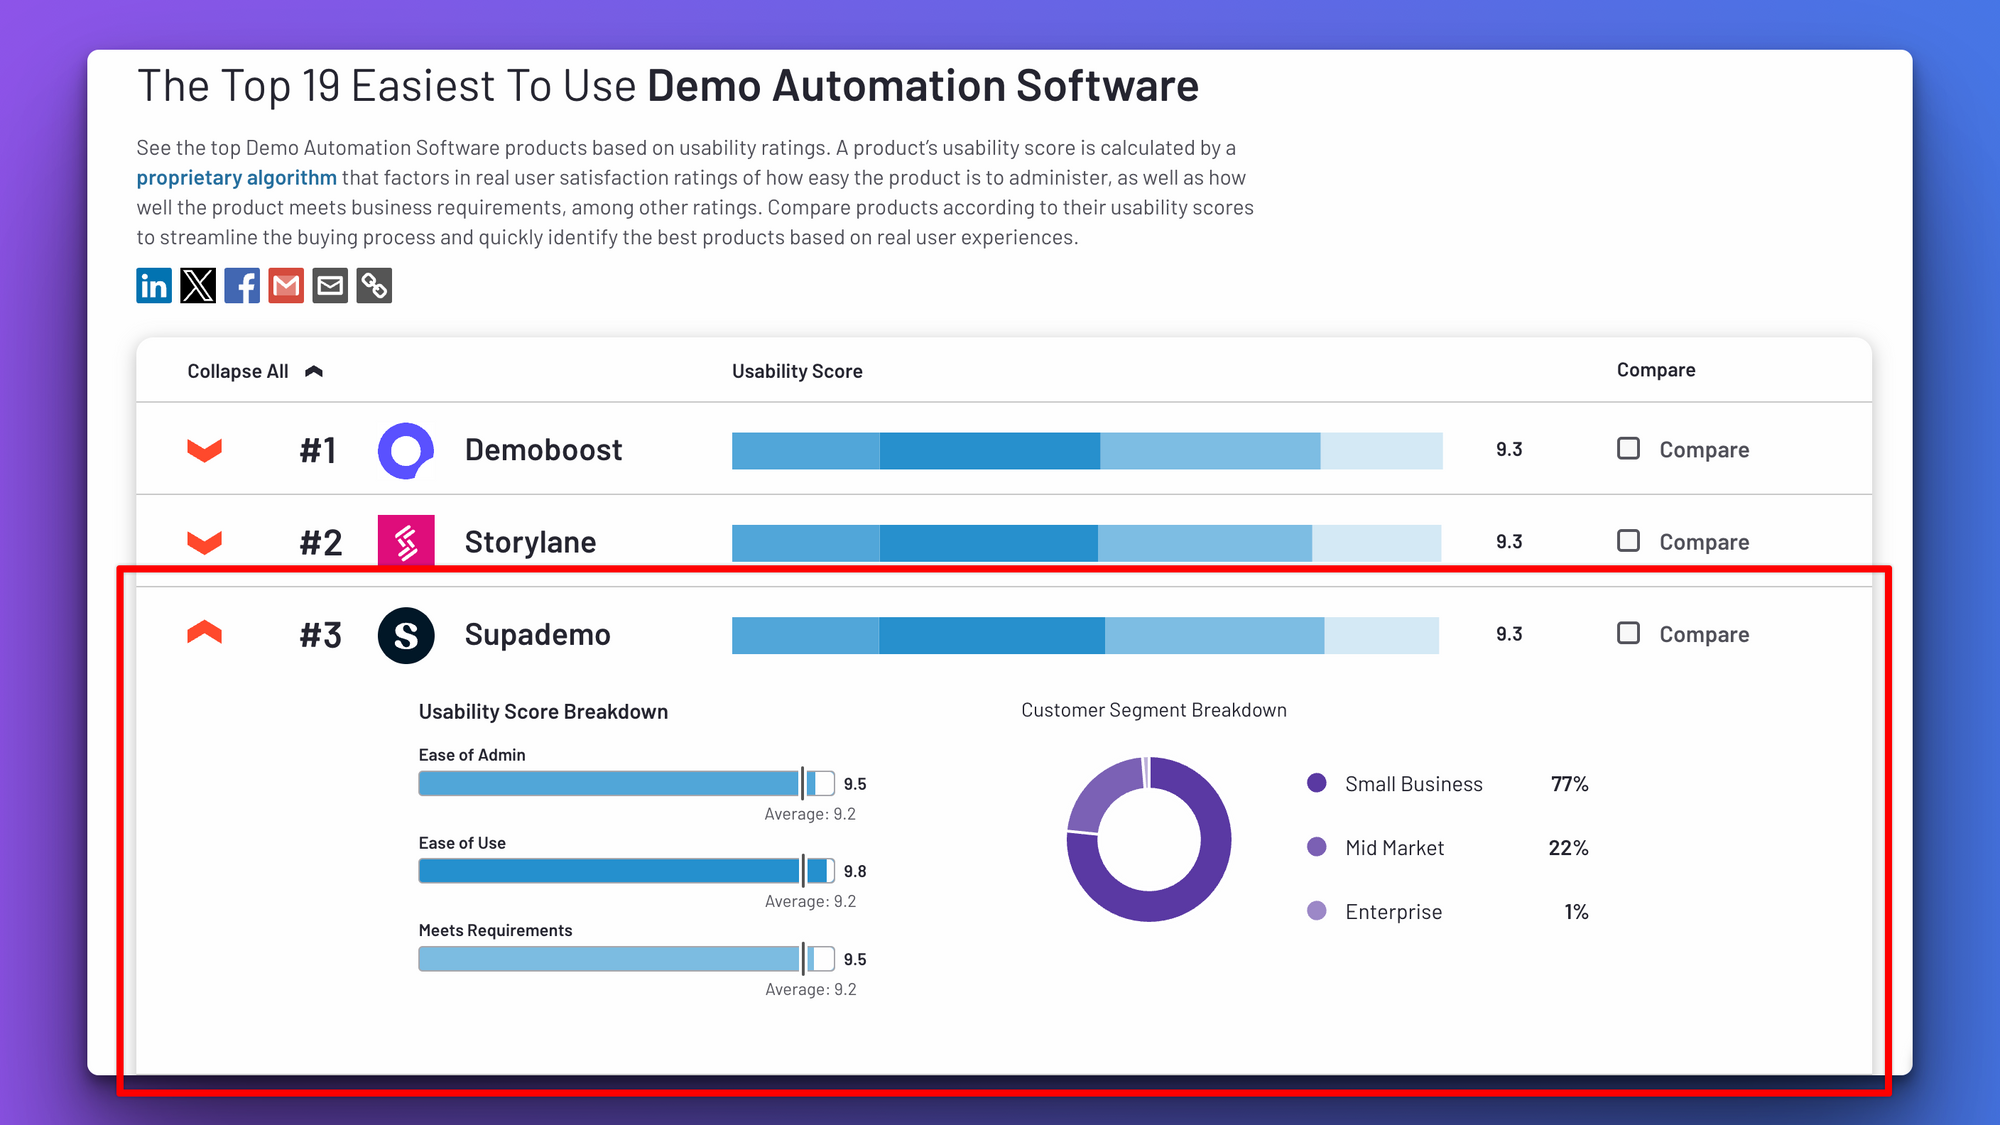 Supademo's rank #3 on G2 as one of the easier demo software to use.